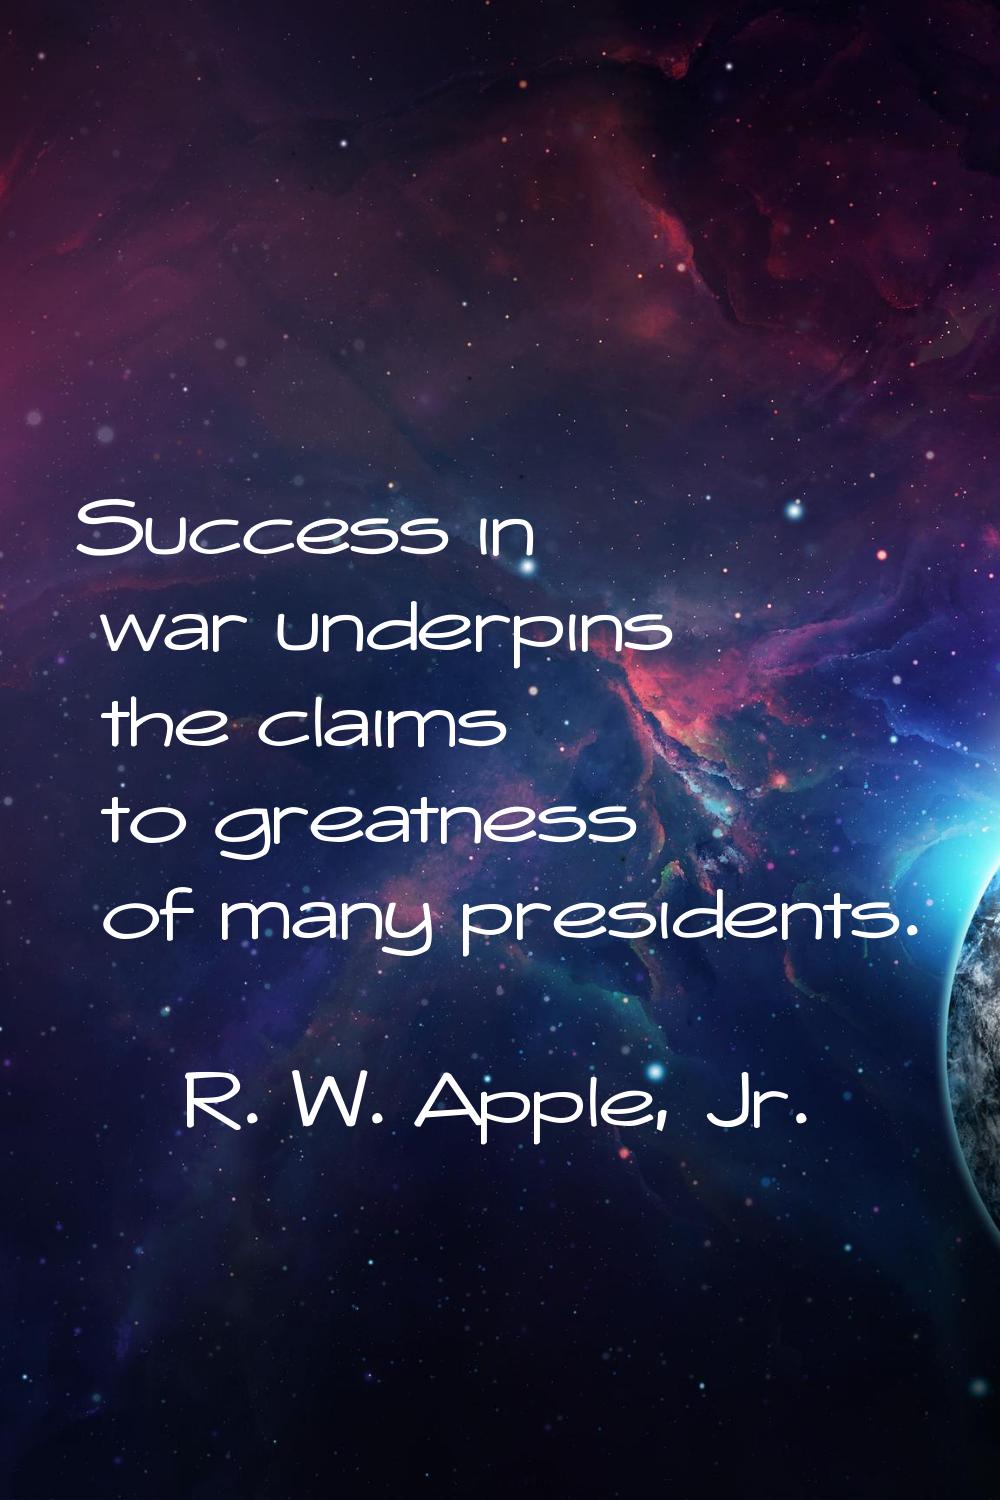 Success in war underpins the claims to greatness of many presidents.